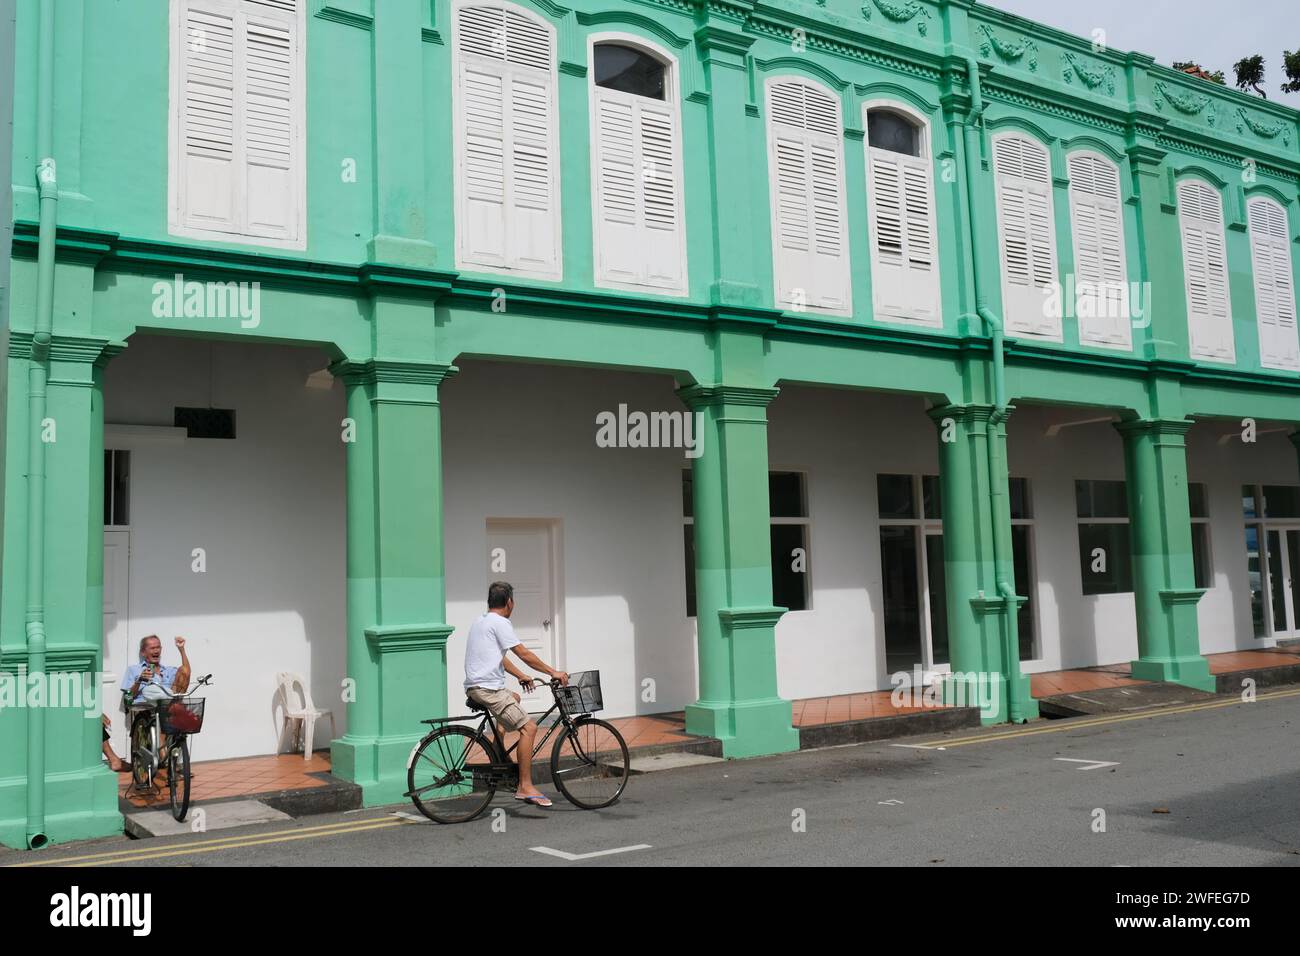 Old Singapore Chinese men on bikes greeting each other by a vibrantly painted shophouse building in Singapore's Little India Stock Photo